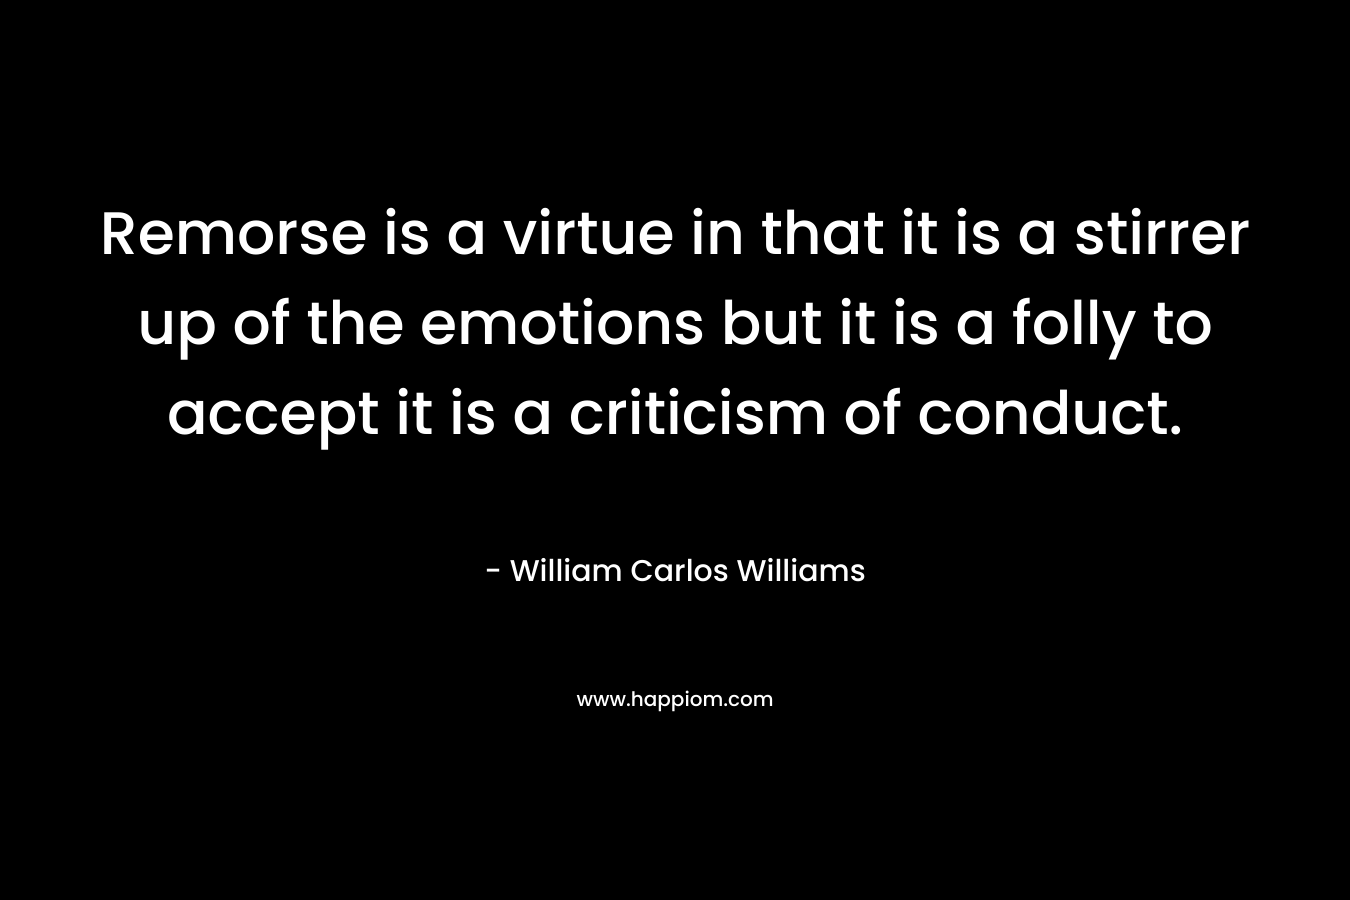 Remorse is a virtue in that it is a stirrer up of the emotions but it is a folly to accept it is a criticism of conduct.